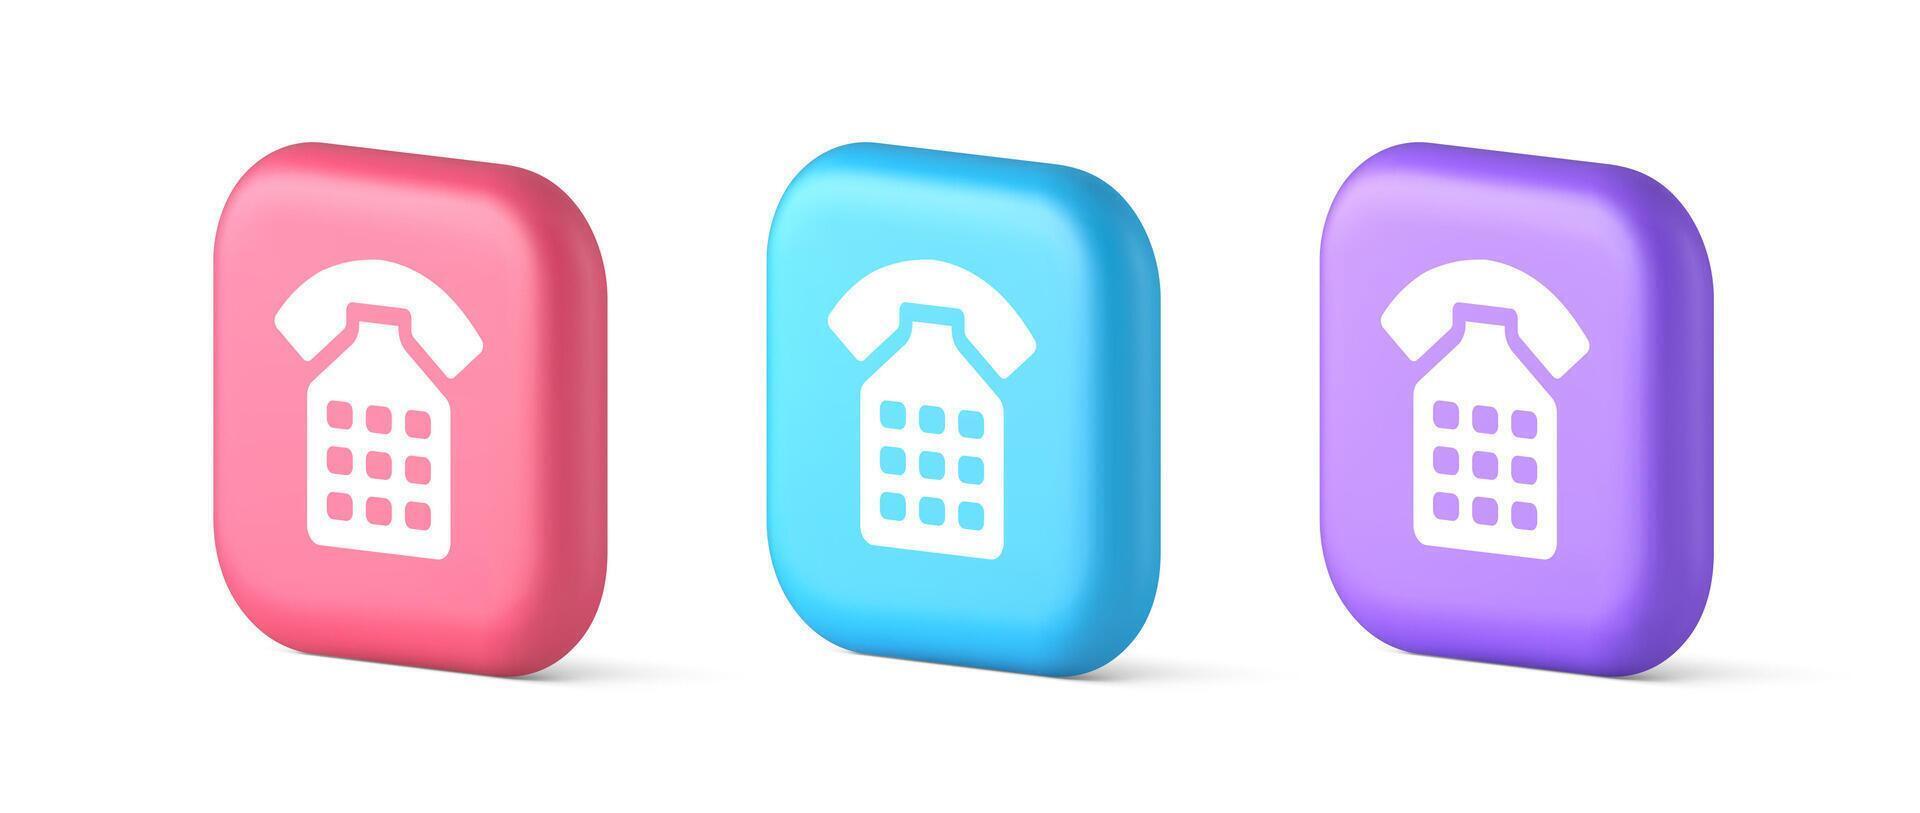 Phone call contact communication web button helpline hotline 3d realistic icon vector